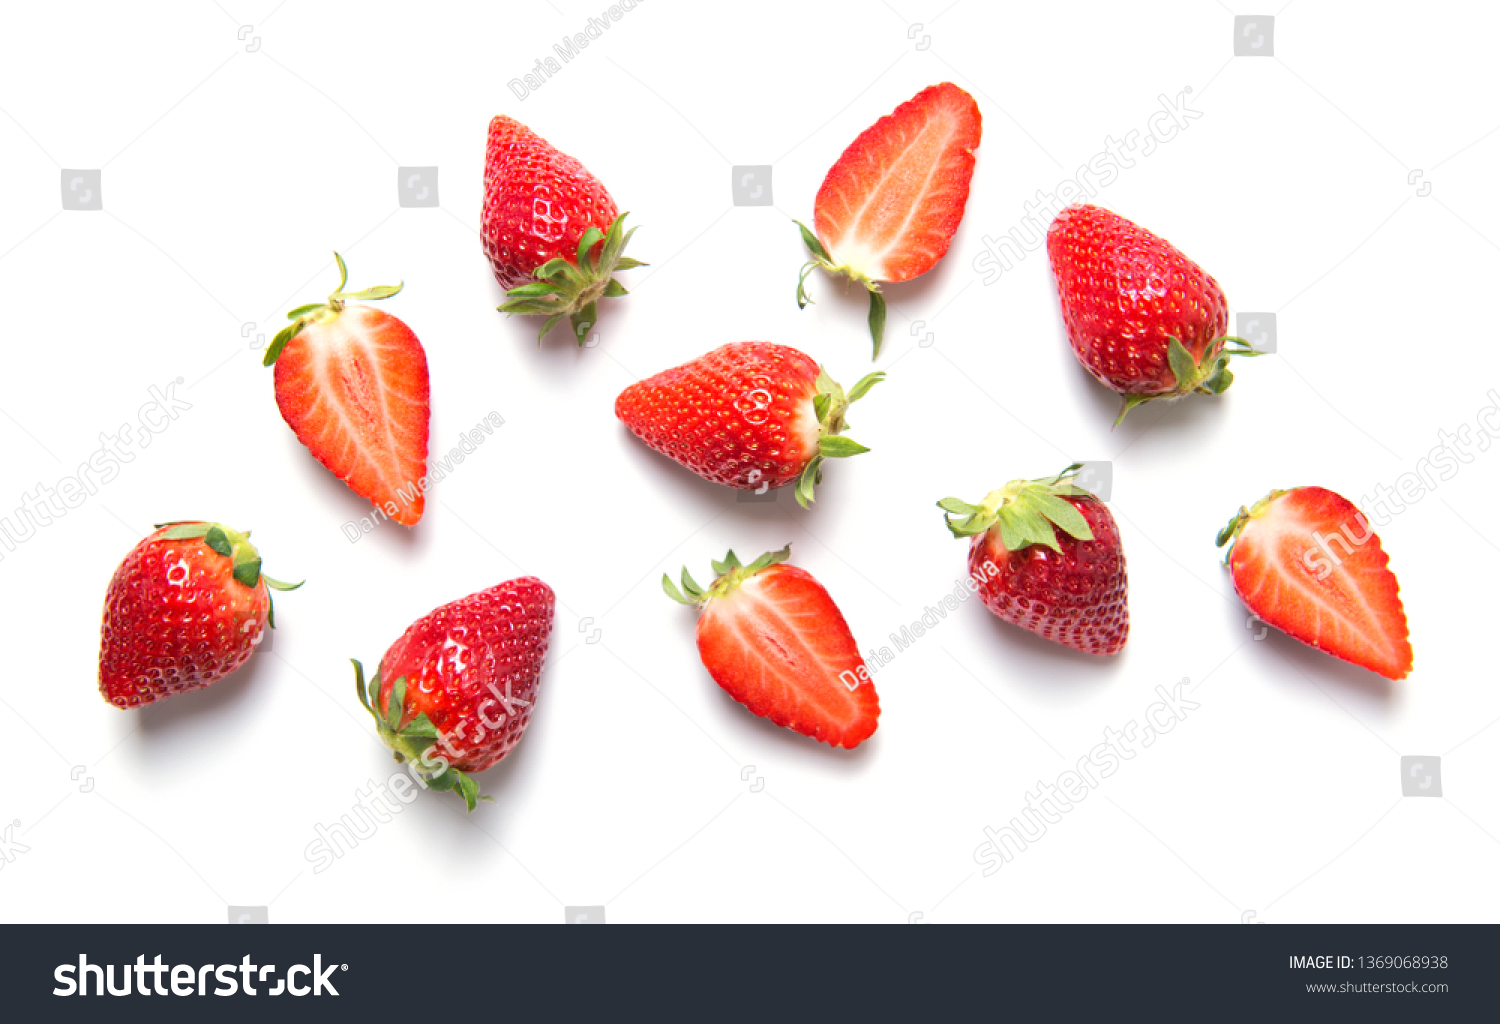 Ripe strawberries isolated on white background, berry pattern, top view #1369068938